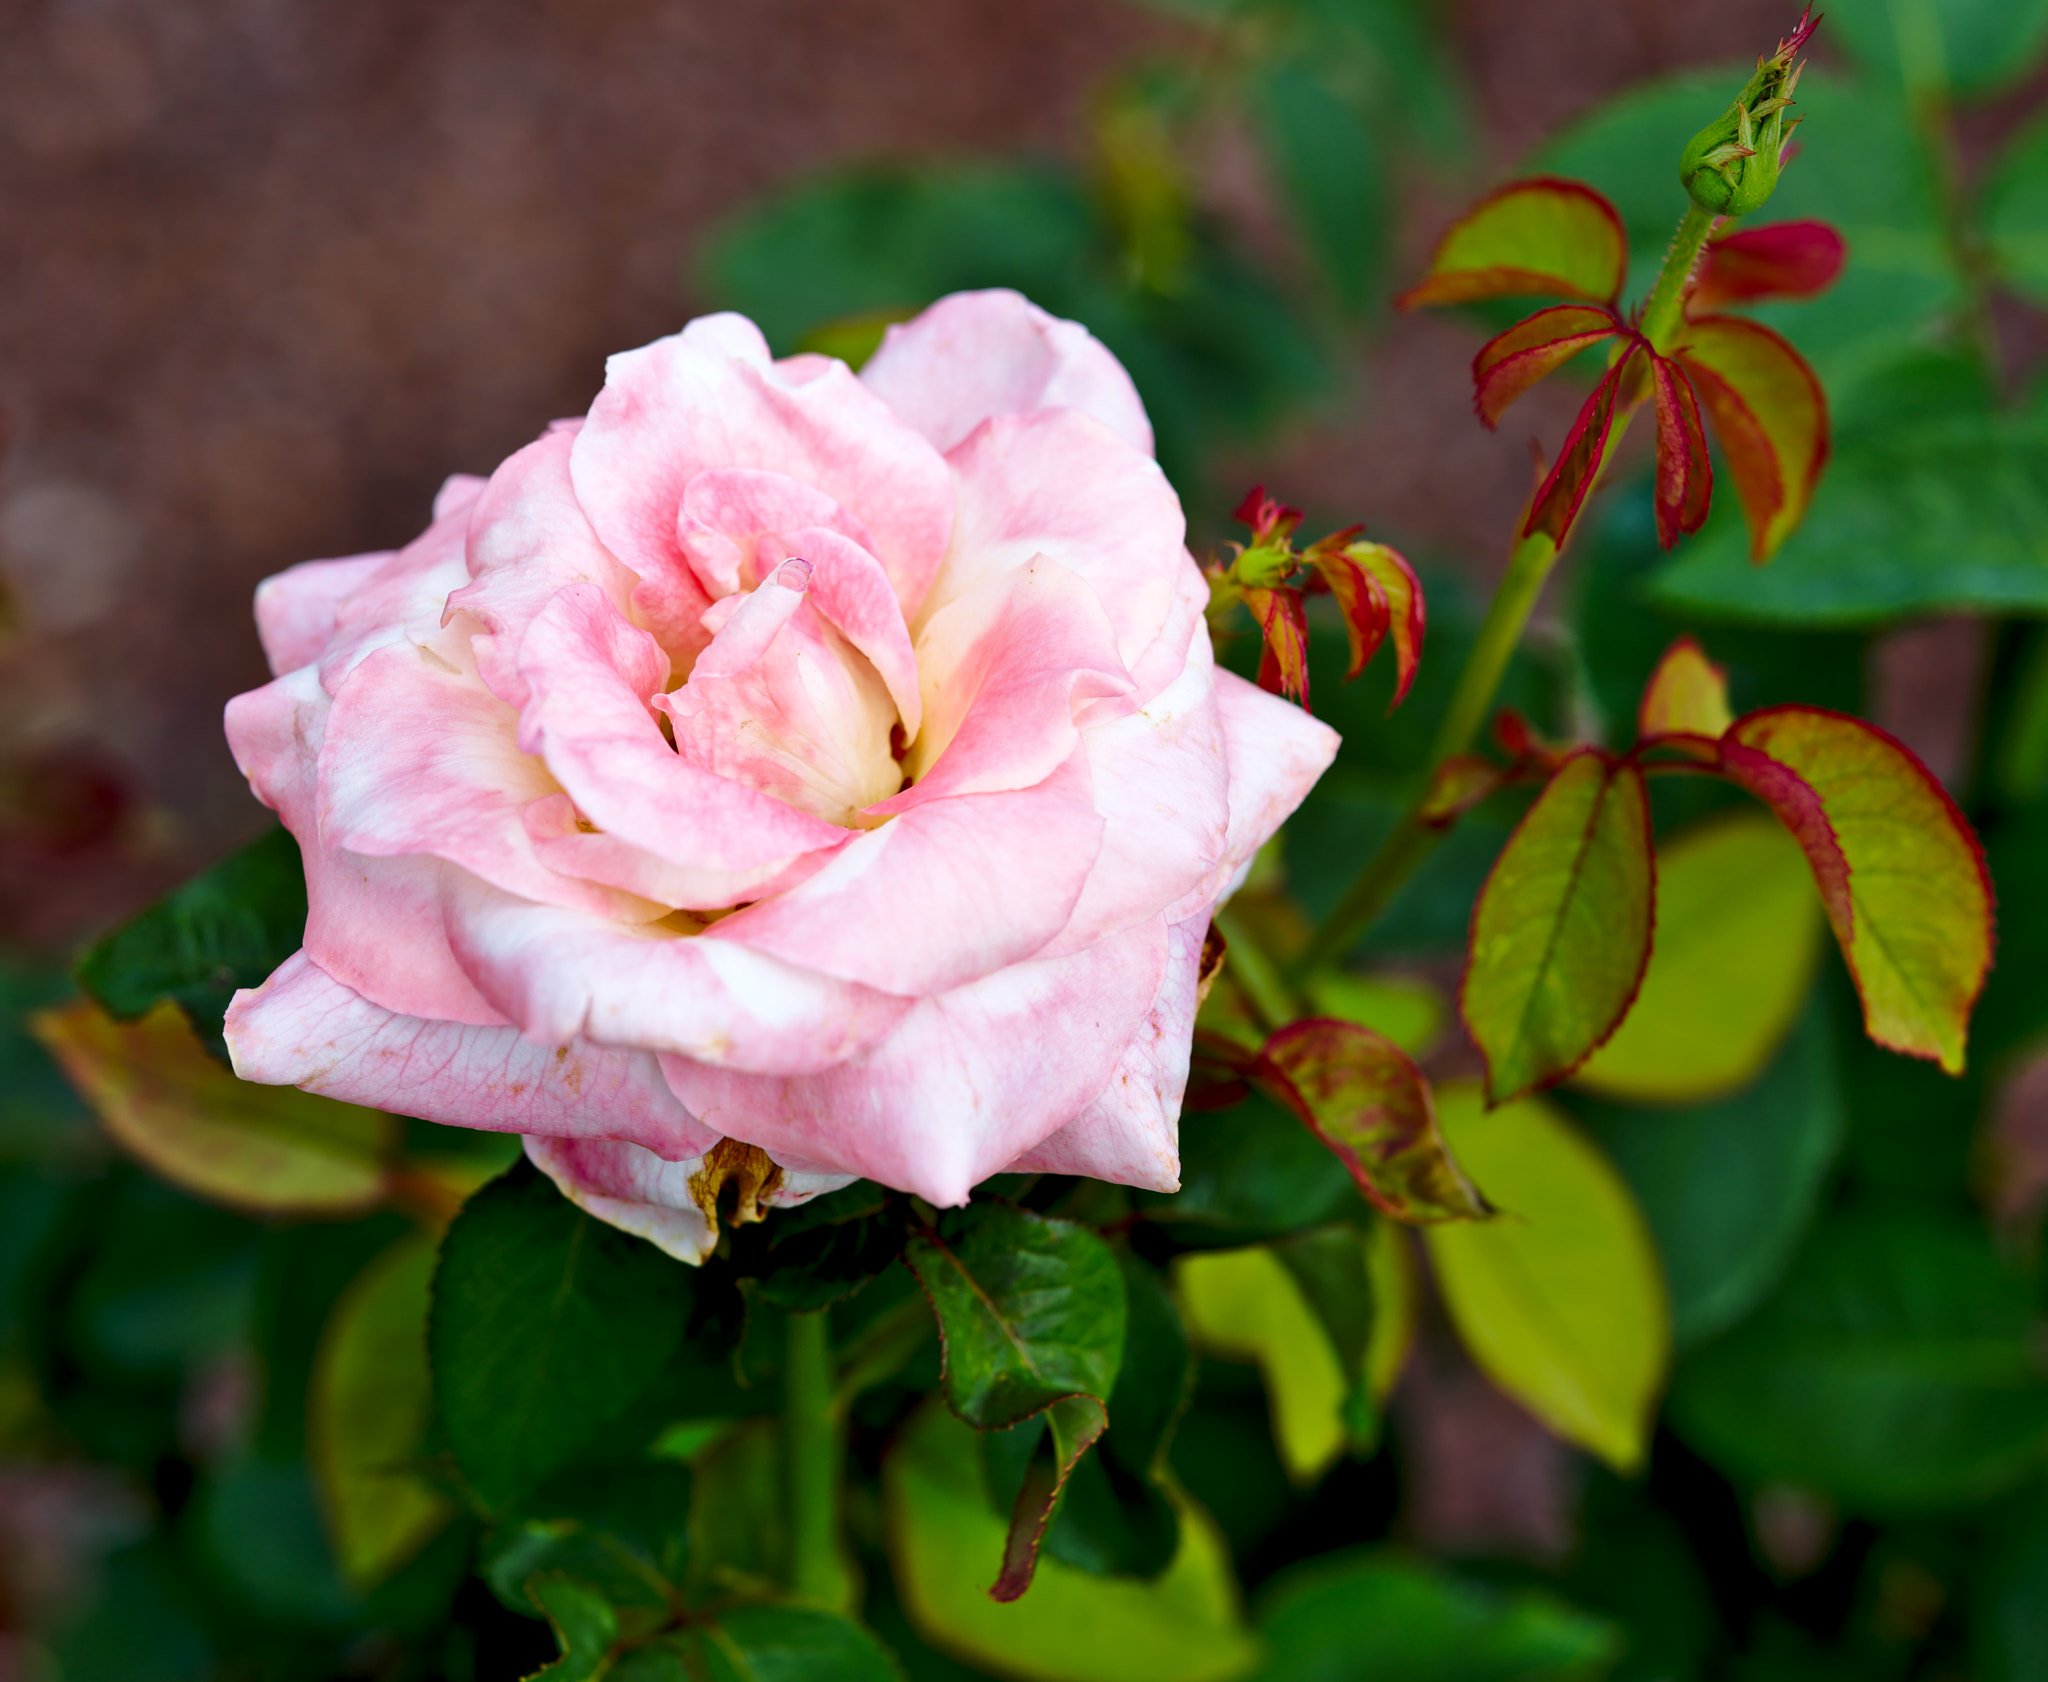 ZEISS Otus 85mm F1.4 sample photo. "ivory tower" - a hybrid rose photography